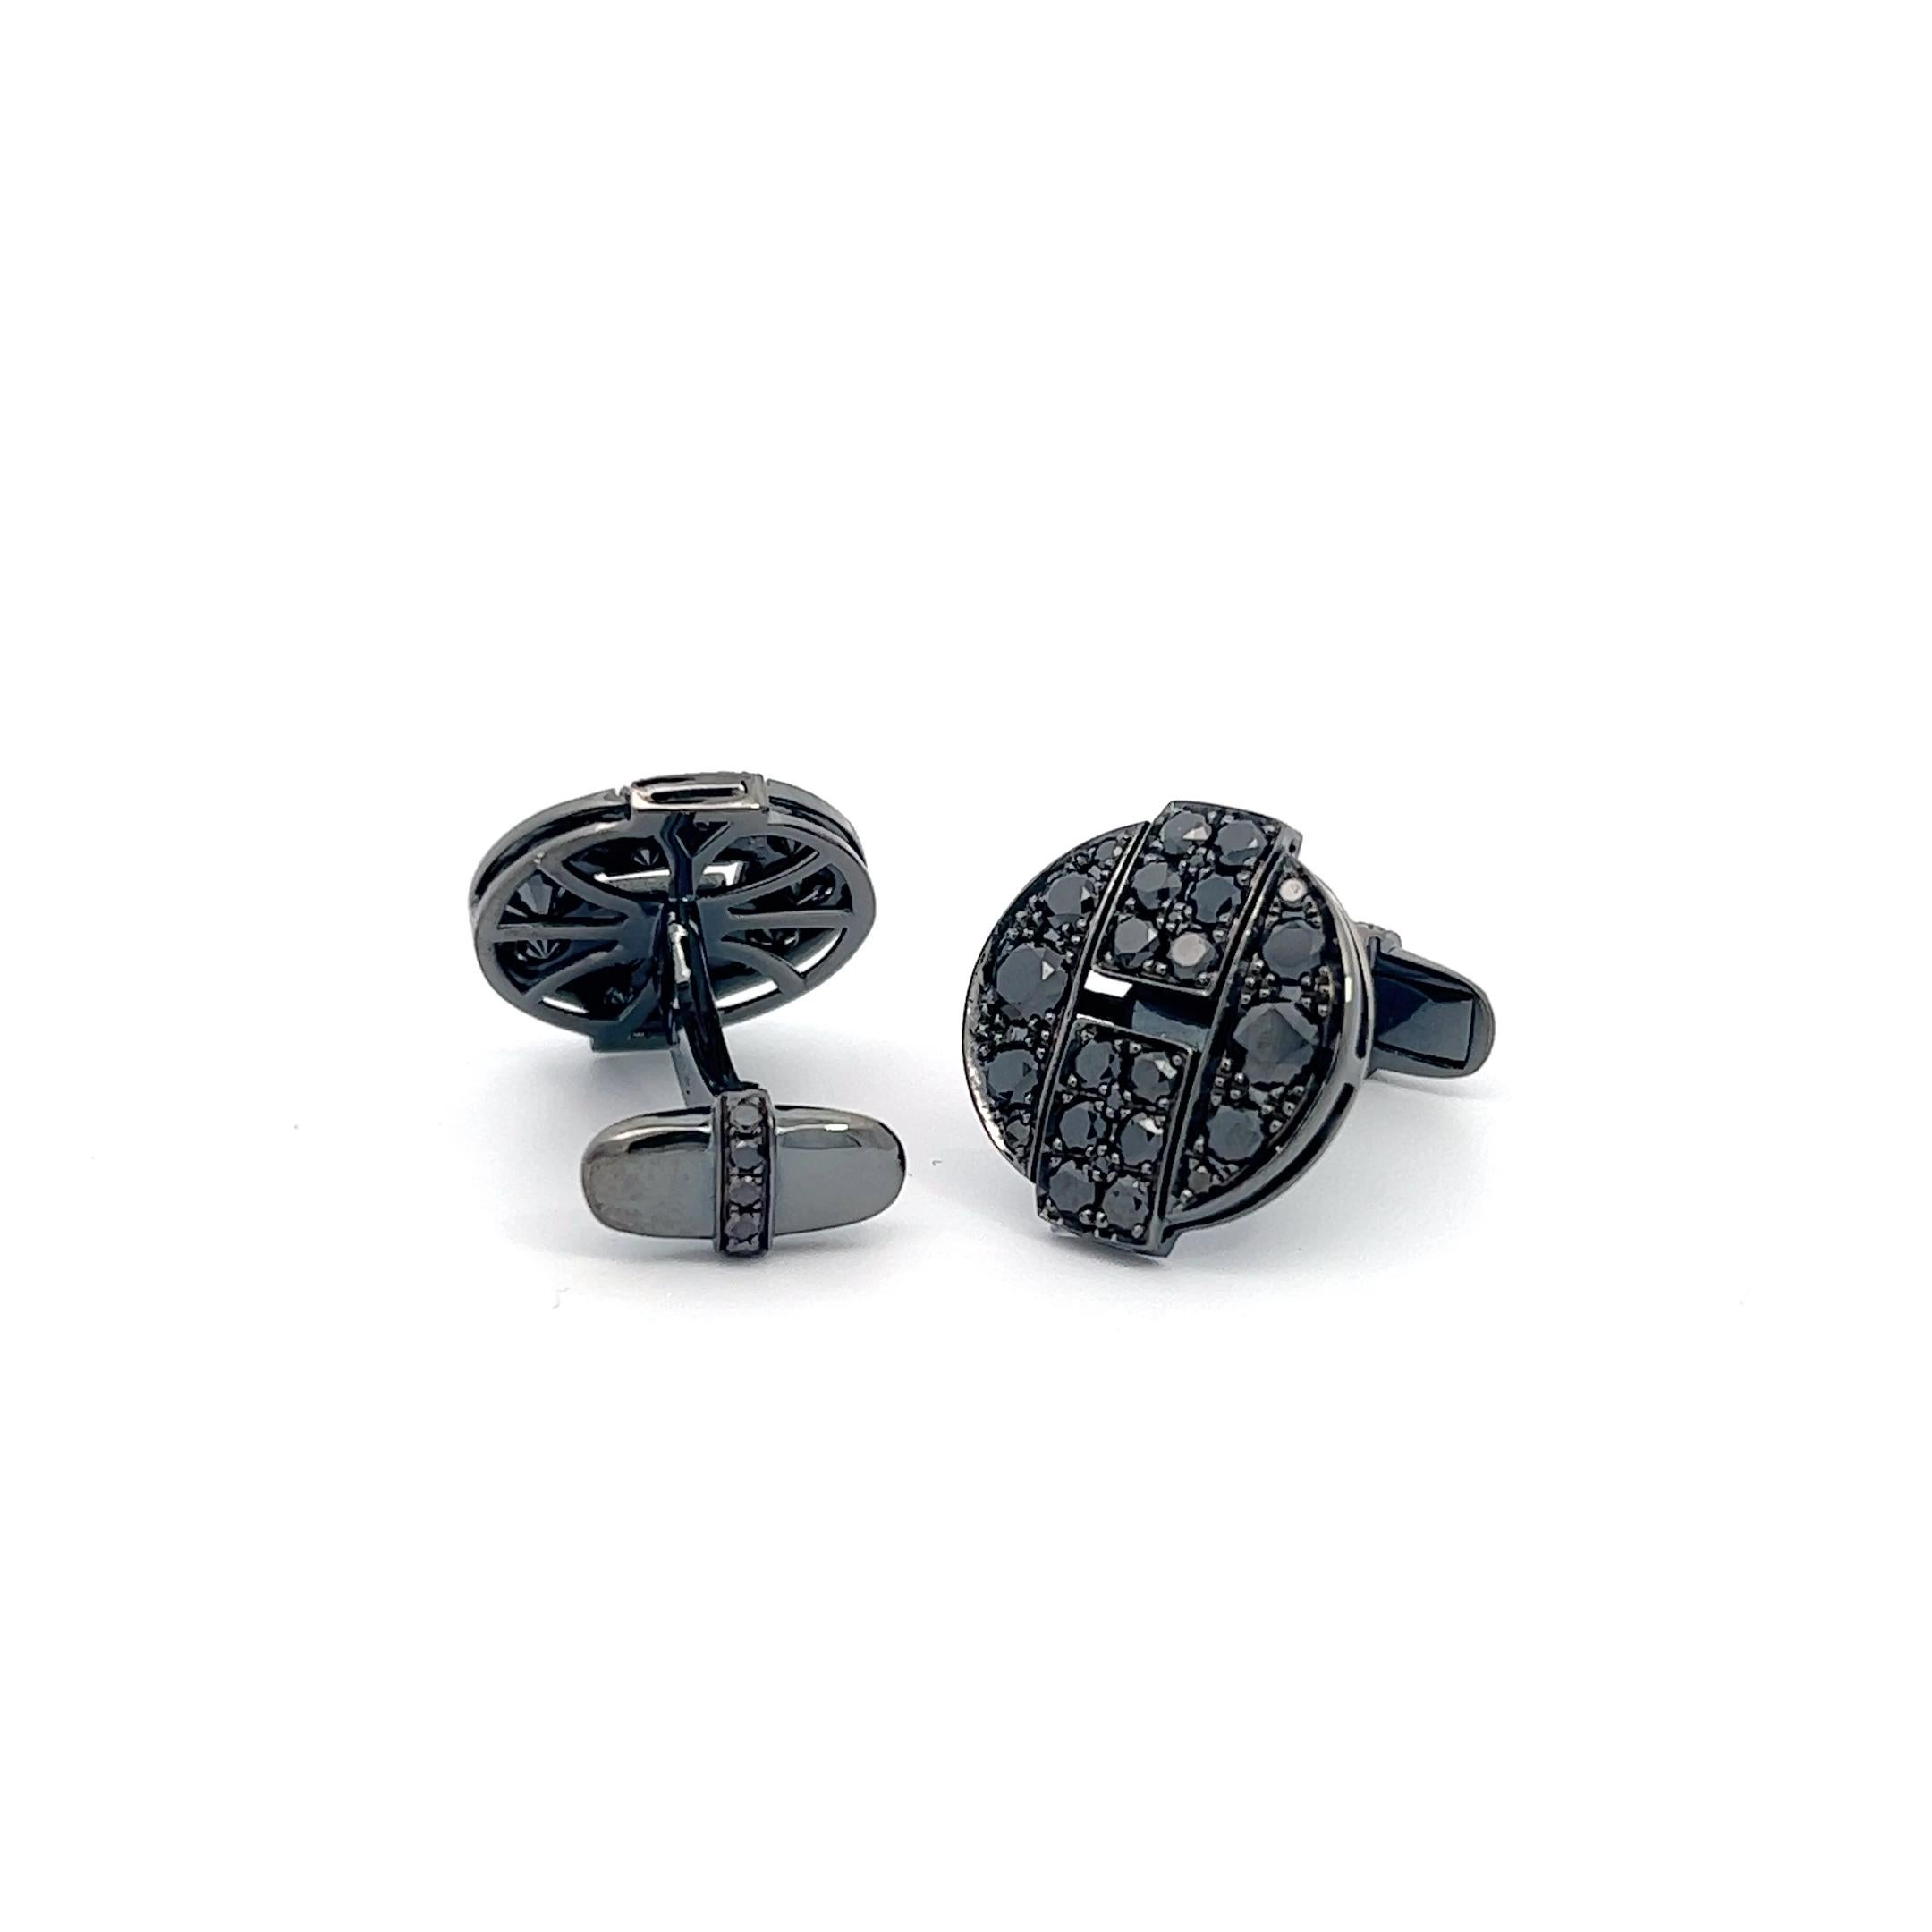 Cufflinks and Studs sold separately.
Distinguished and daring, our Black Diamond Cufflinks and Shirt Stud Set is the epitome of refined luxury. Crafted with precision and passion, these exquisite accessories seamlessly blend the timeless allure of